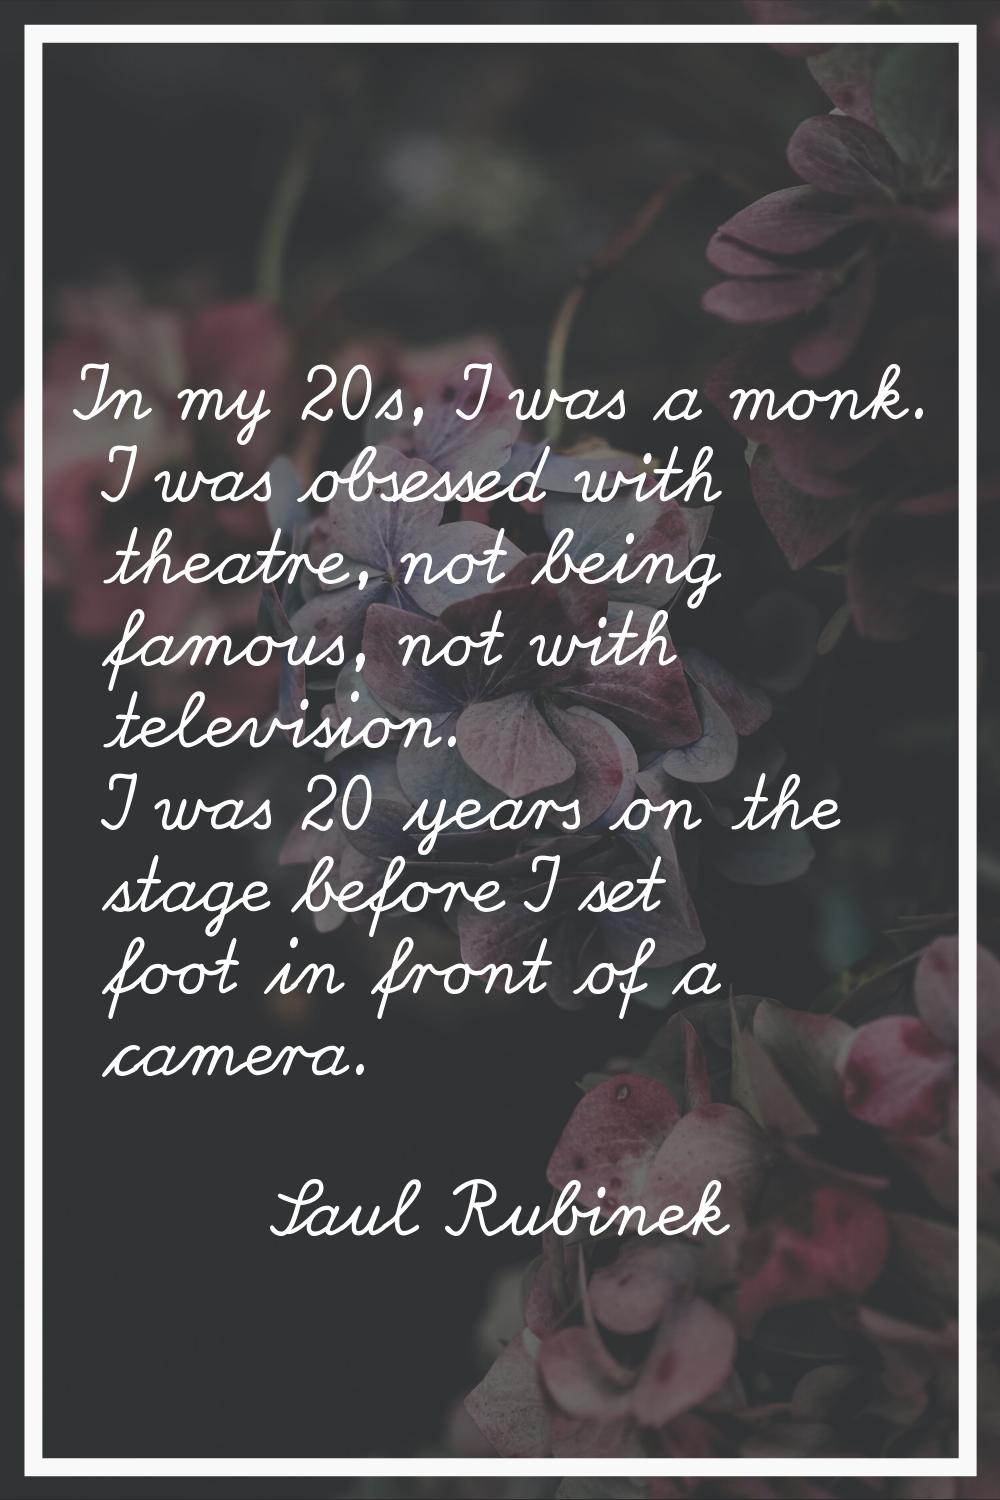 In my 20s, I was a monk. I was obsessed with theatre, not being famous, not with television. I was 